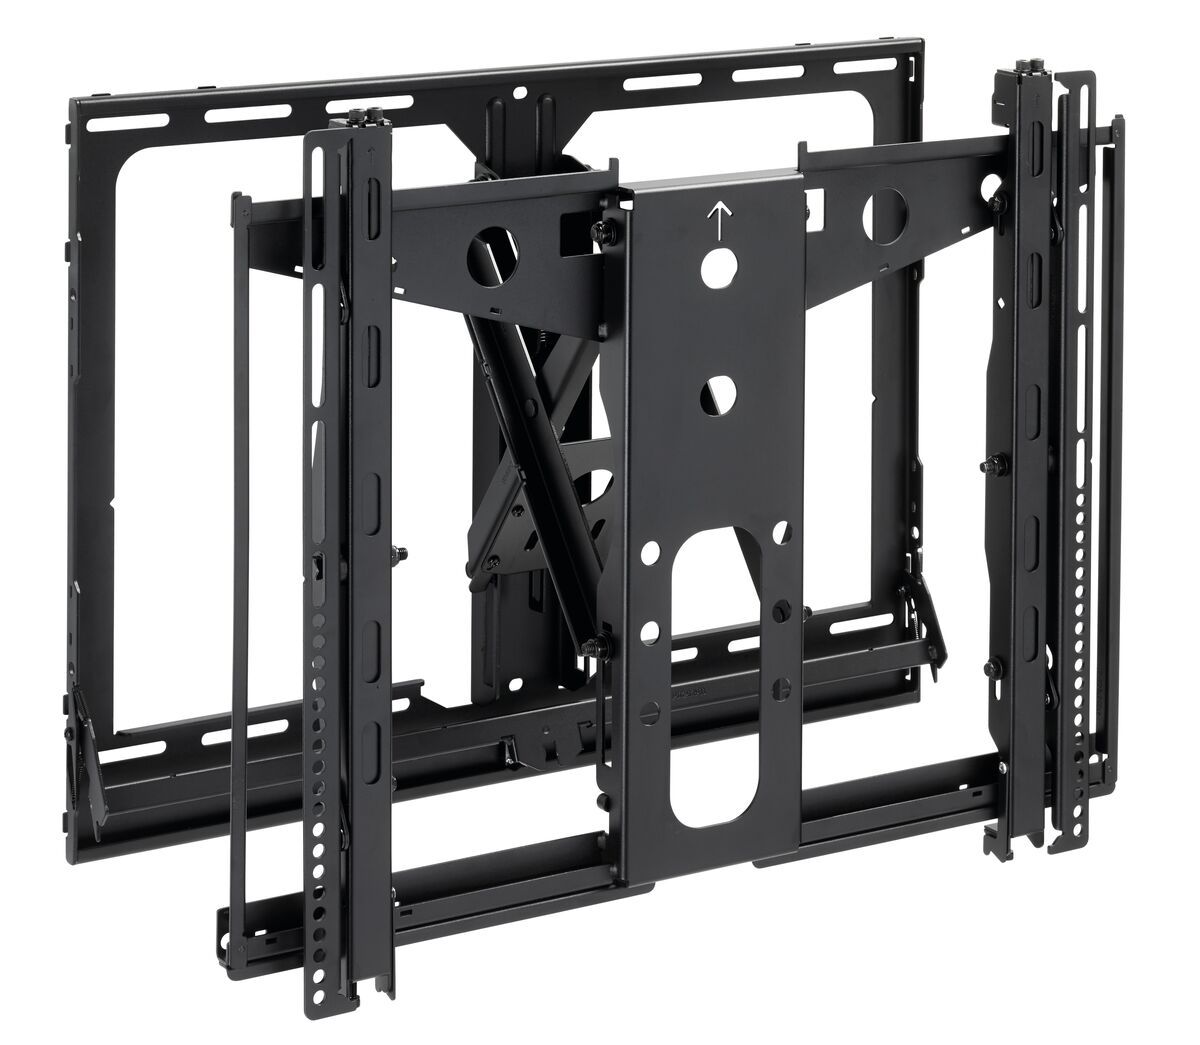 VOGEL PFW 6880 SLIM VIDEO WALL POP-OUT WALL MOUNT 37" - 65" UP TO 45KG MAX VESA 600X400 image